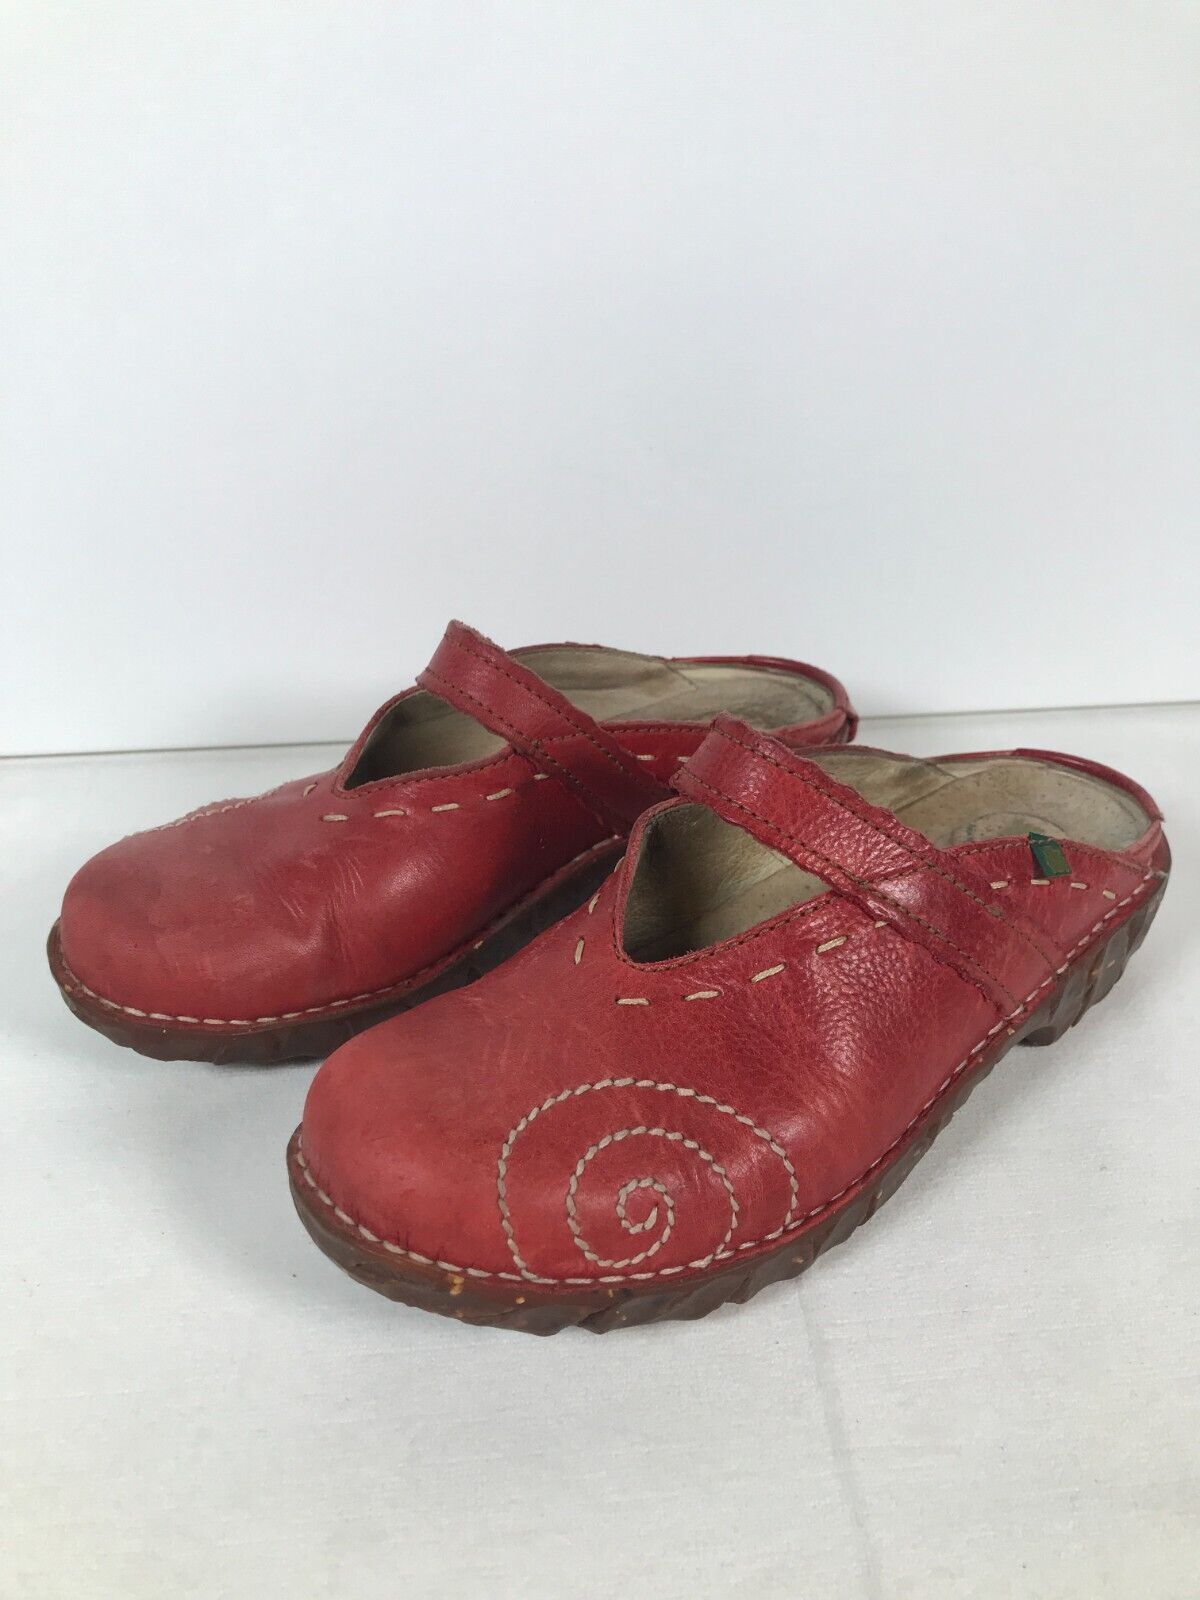 El Naturalista Womens Clogs Yggdrasil Red Leather Sz 8 / 38 Mary Jane Distressed